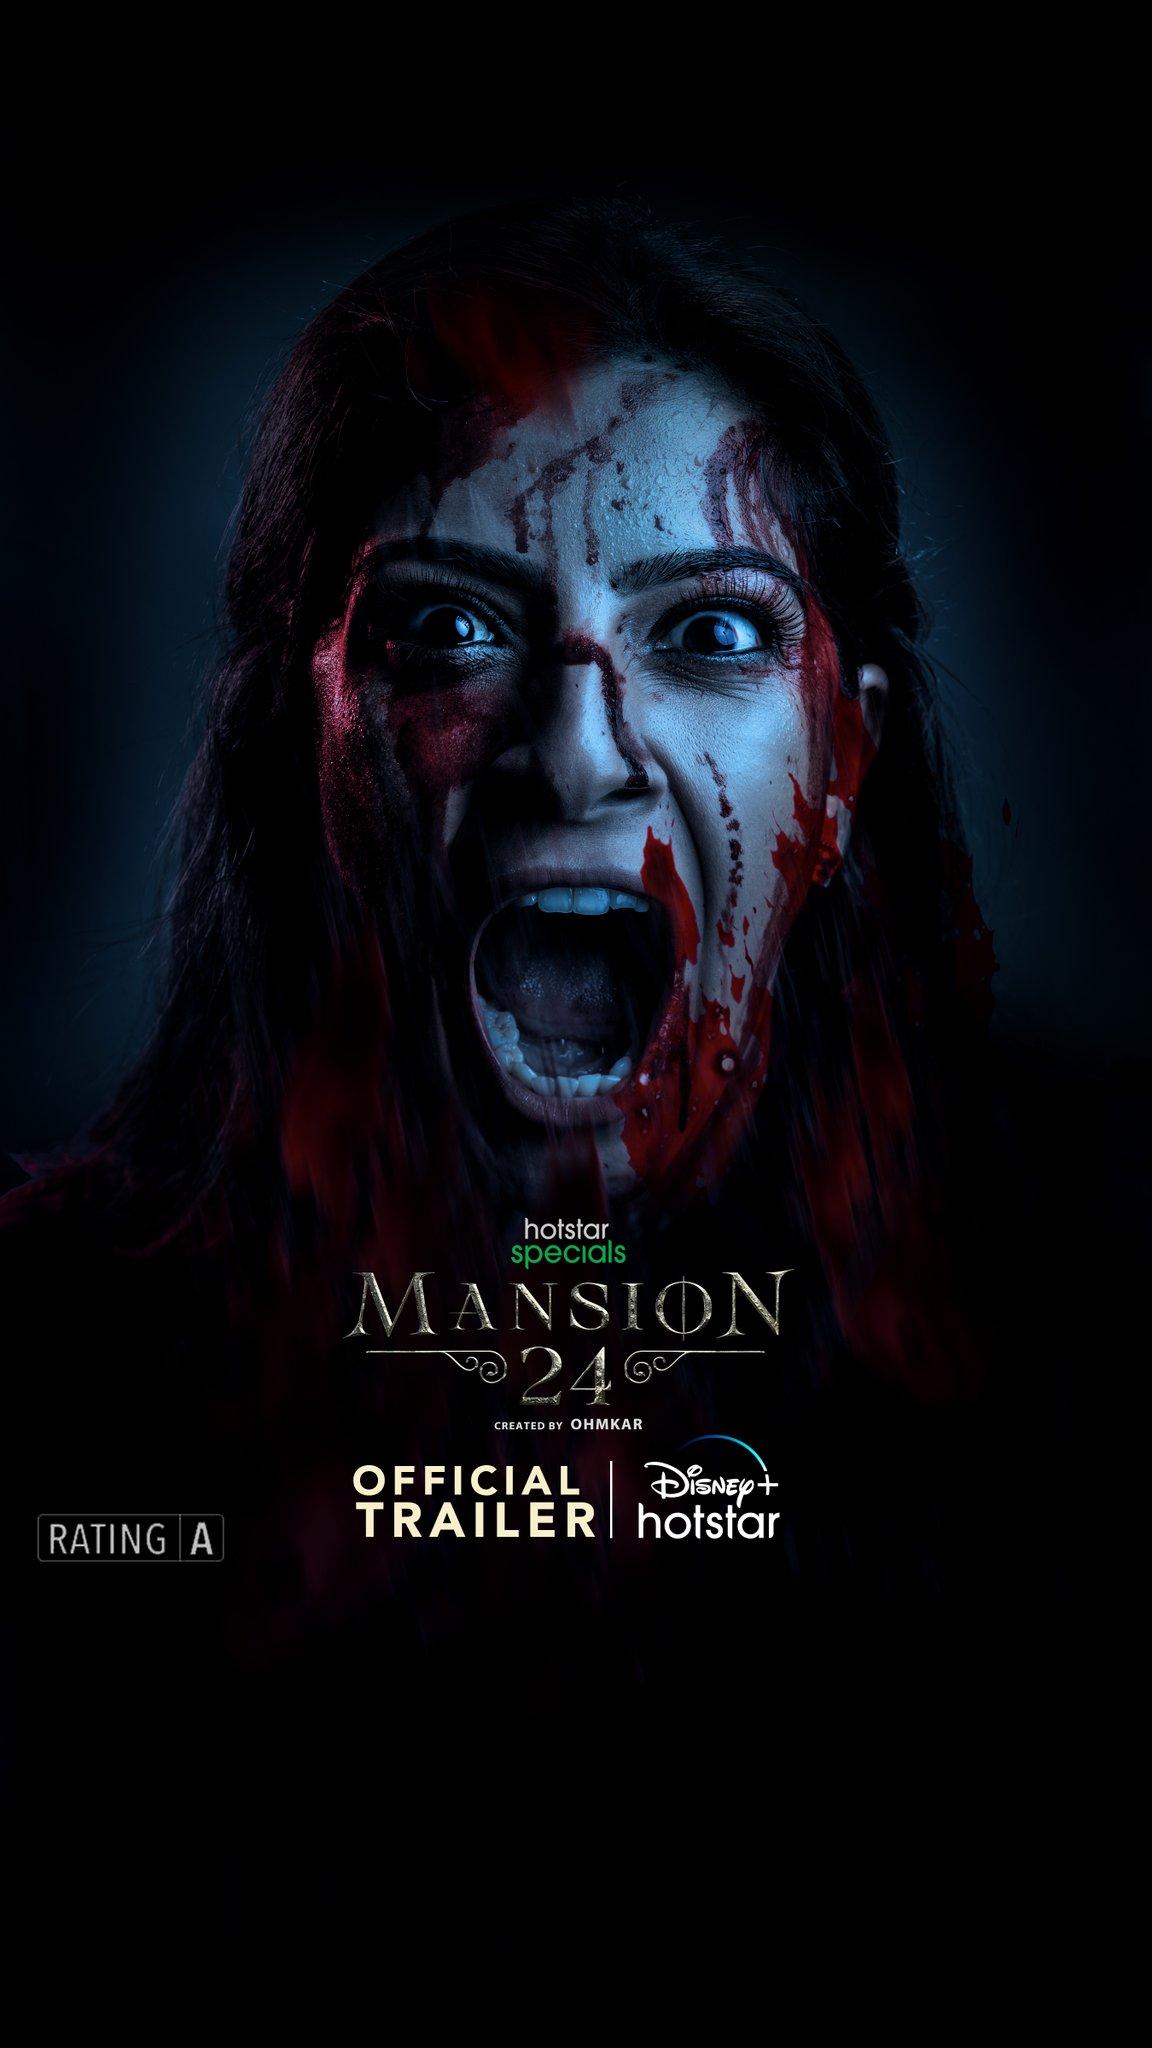 Mansion 24 (October 17) - Streaming on Disney+ HotstarEnter the spine-chilling world of Mansion 24, a Telugu series that follows Amrutha on a quest to find her missing father in a notorious haunted mansion. Ignoring all caution, she ventures into the eerie abode, accompanied by a diverse cast of individuals, each driven by their own motivations.